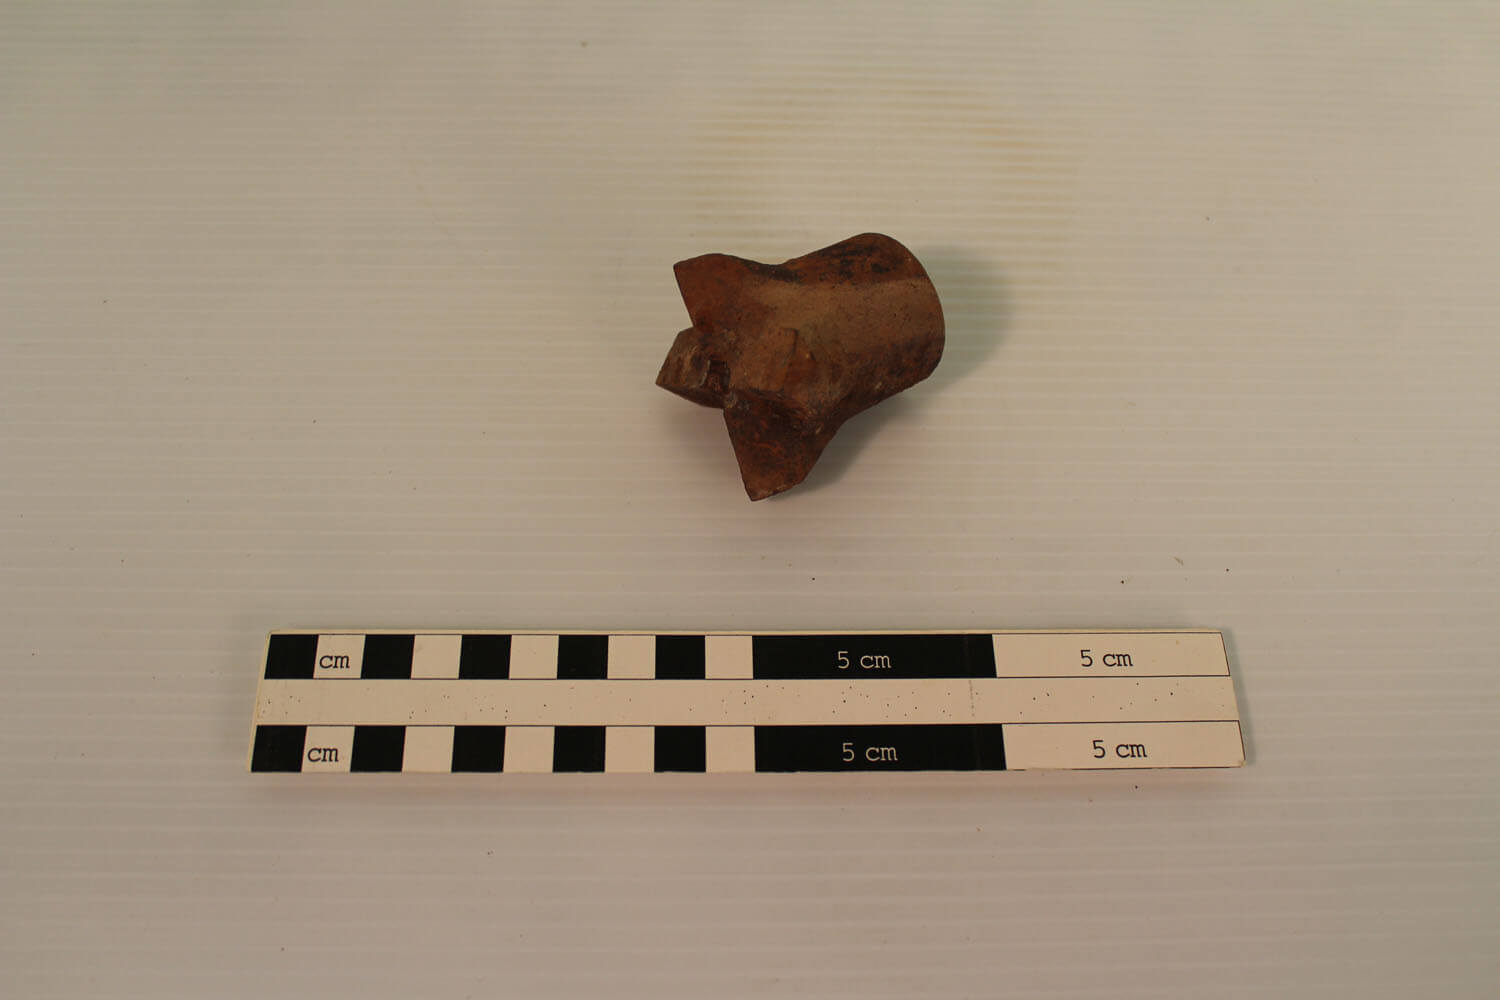 An air pneumatic drill bit used at Calamity Camp. BLM Collection.